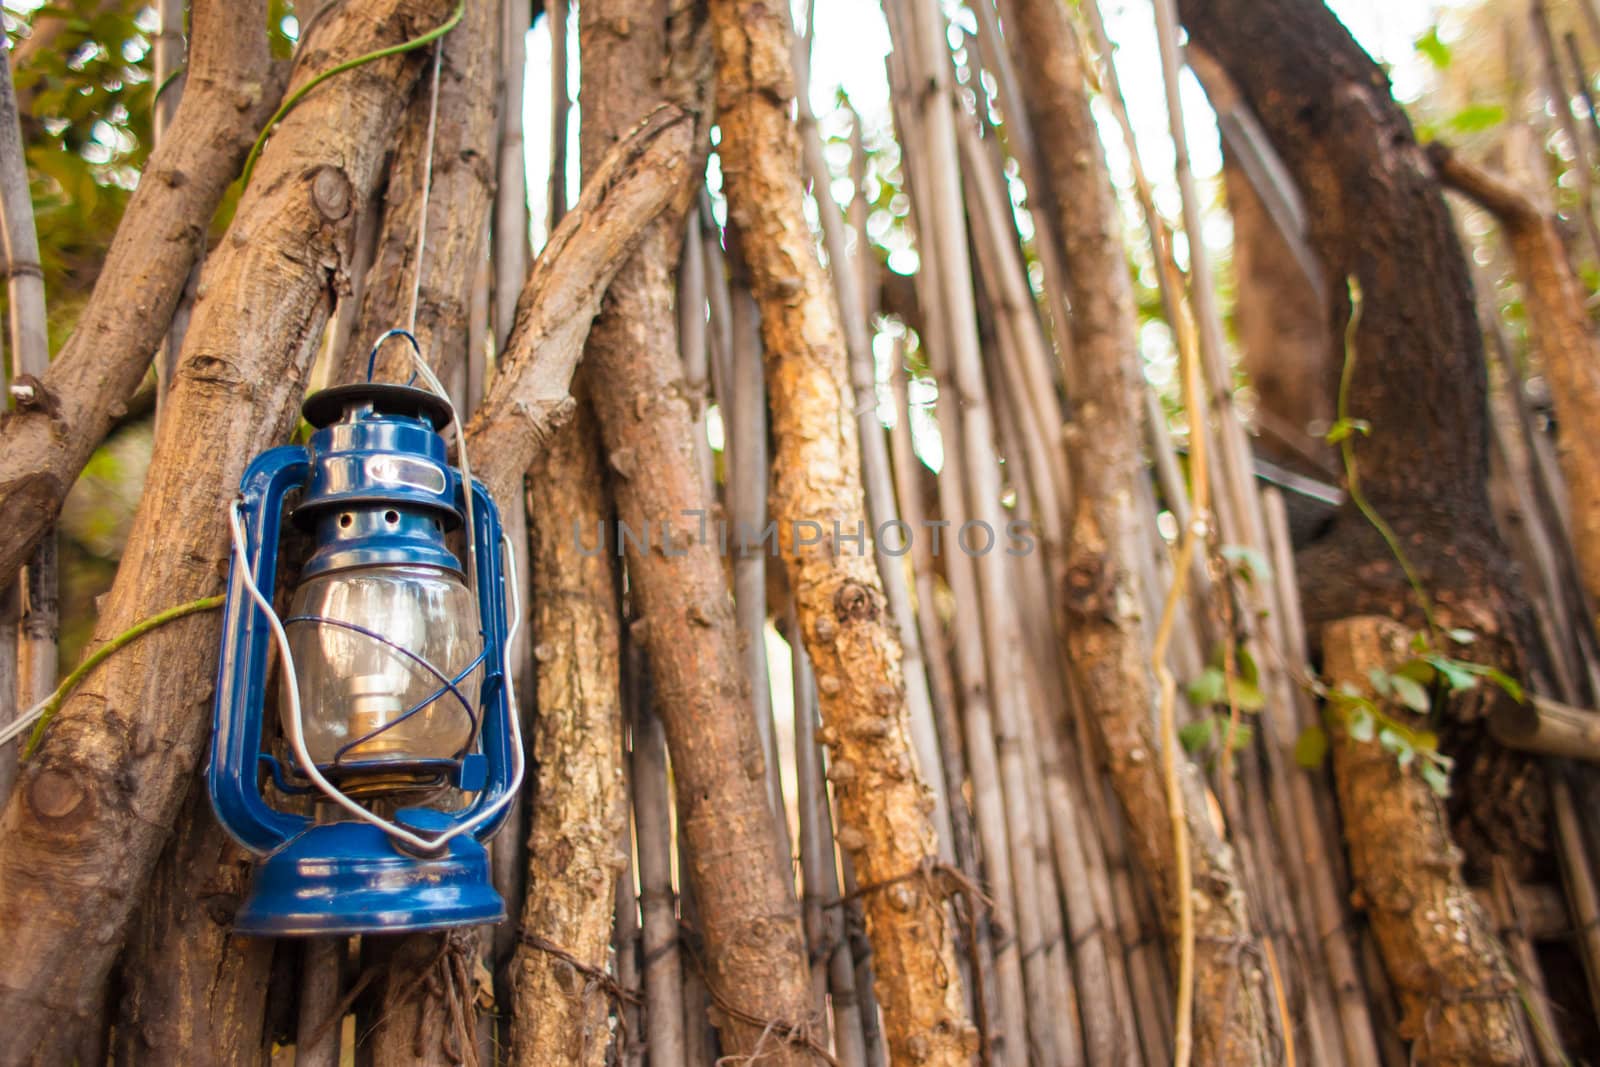 Oil lantern hanging against stick wall in African village